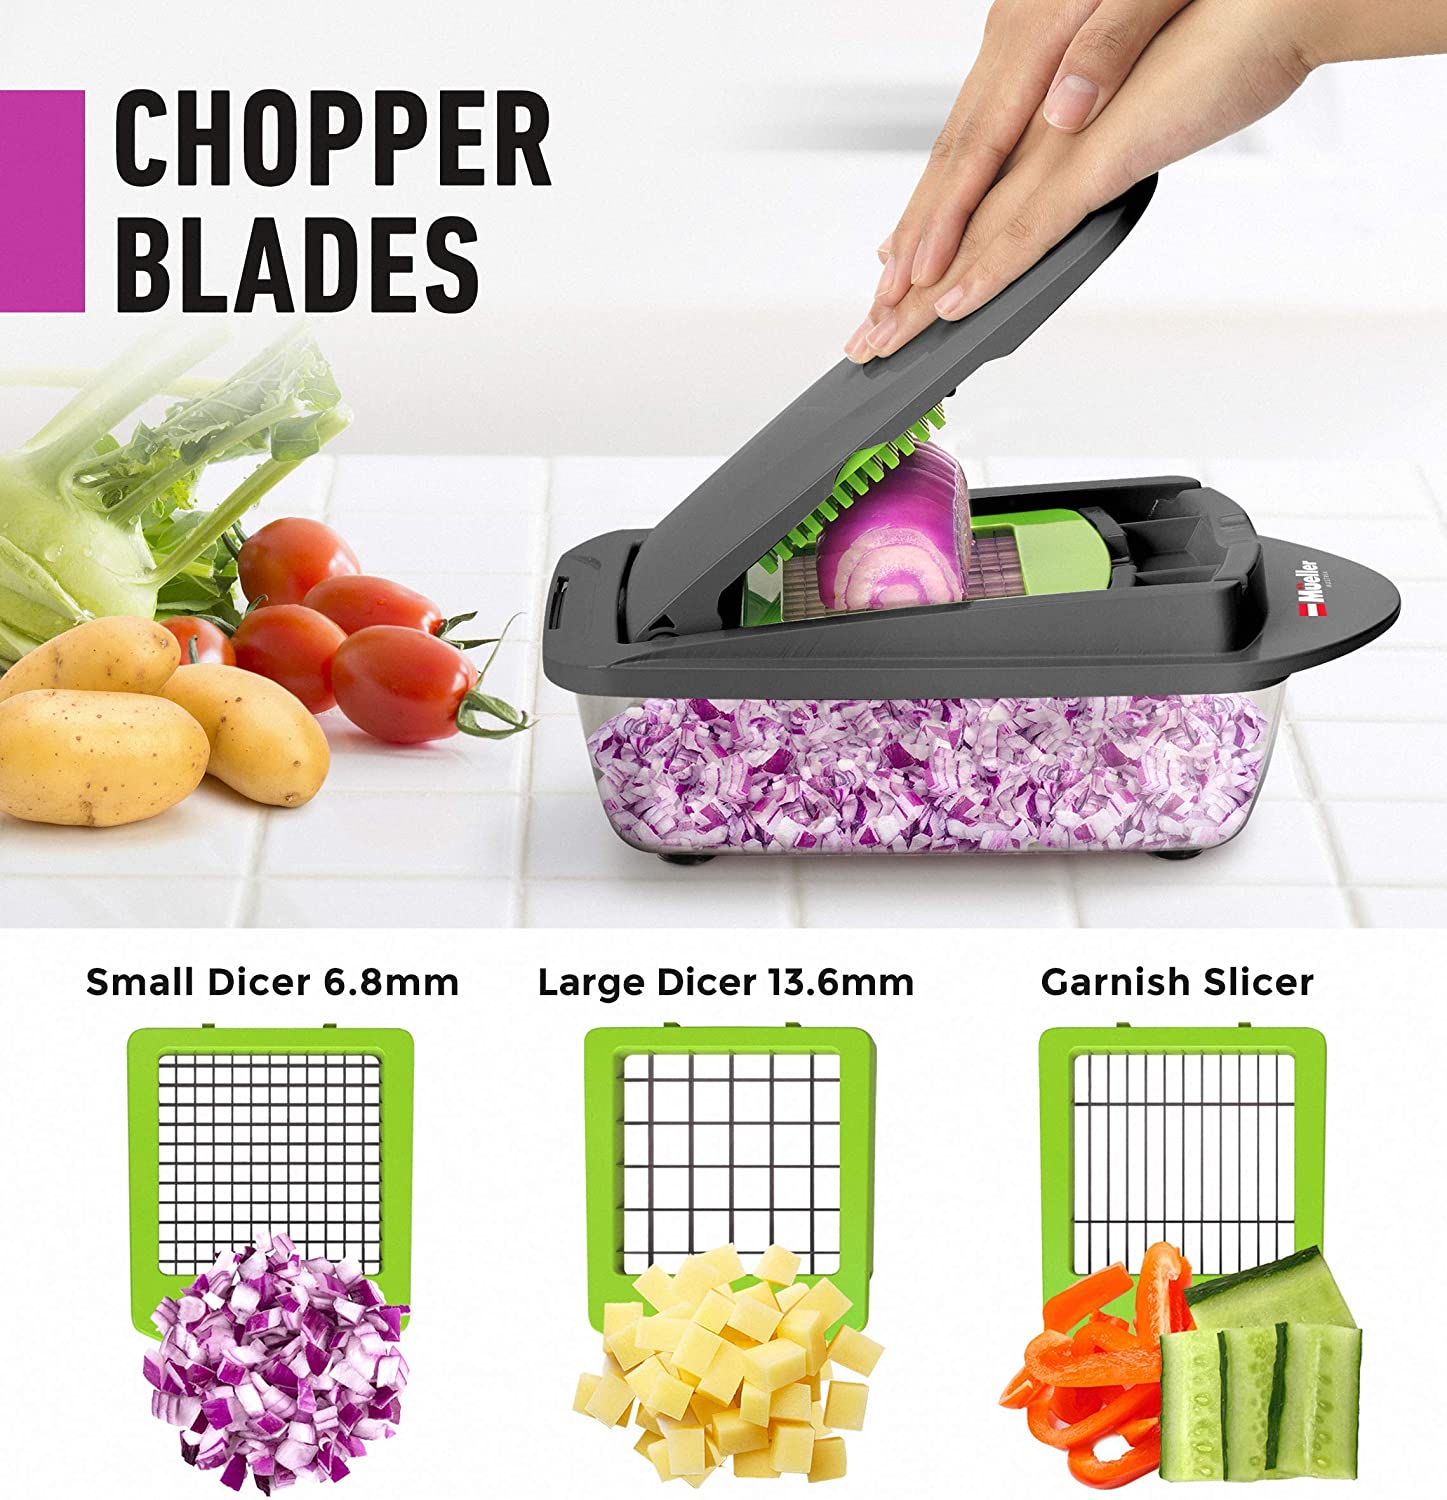 Mueller Austria Pro-Series Onion Mincer Chopper, Slicer, Vegetable Chopper,  Cutter, Dicer, Vegetable Slicer with Container and Blades